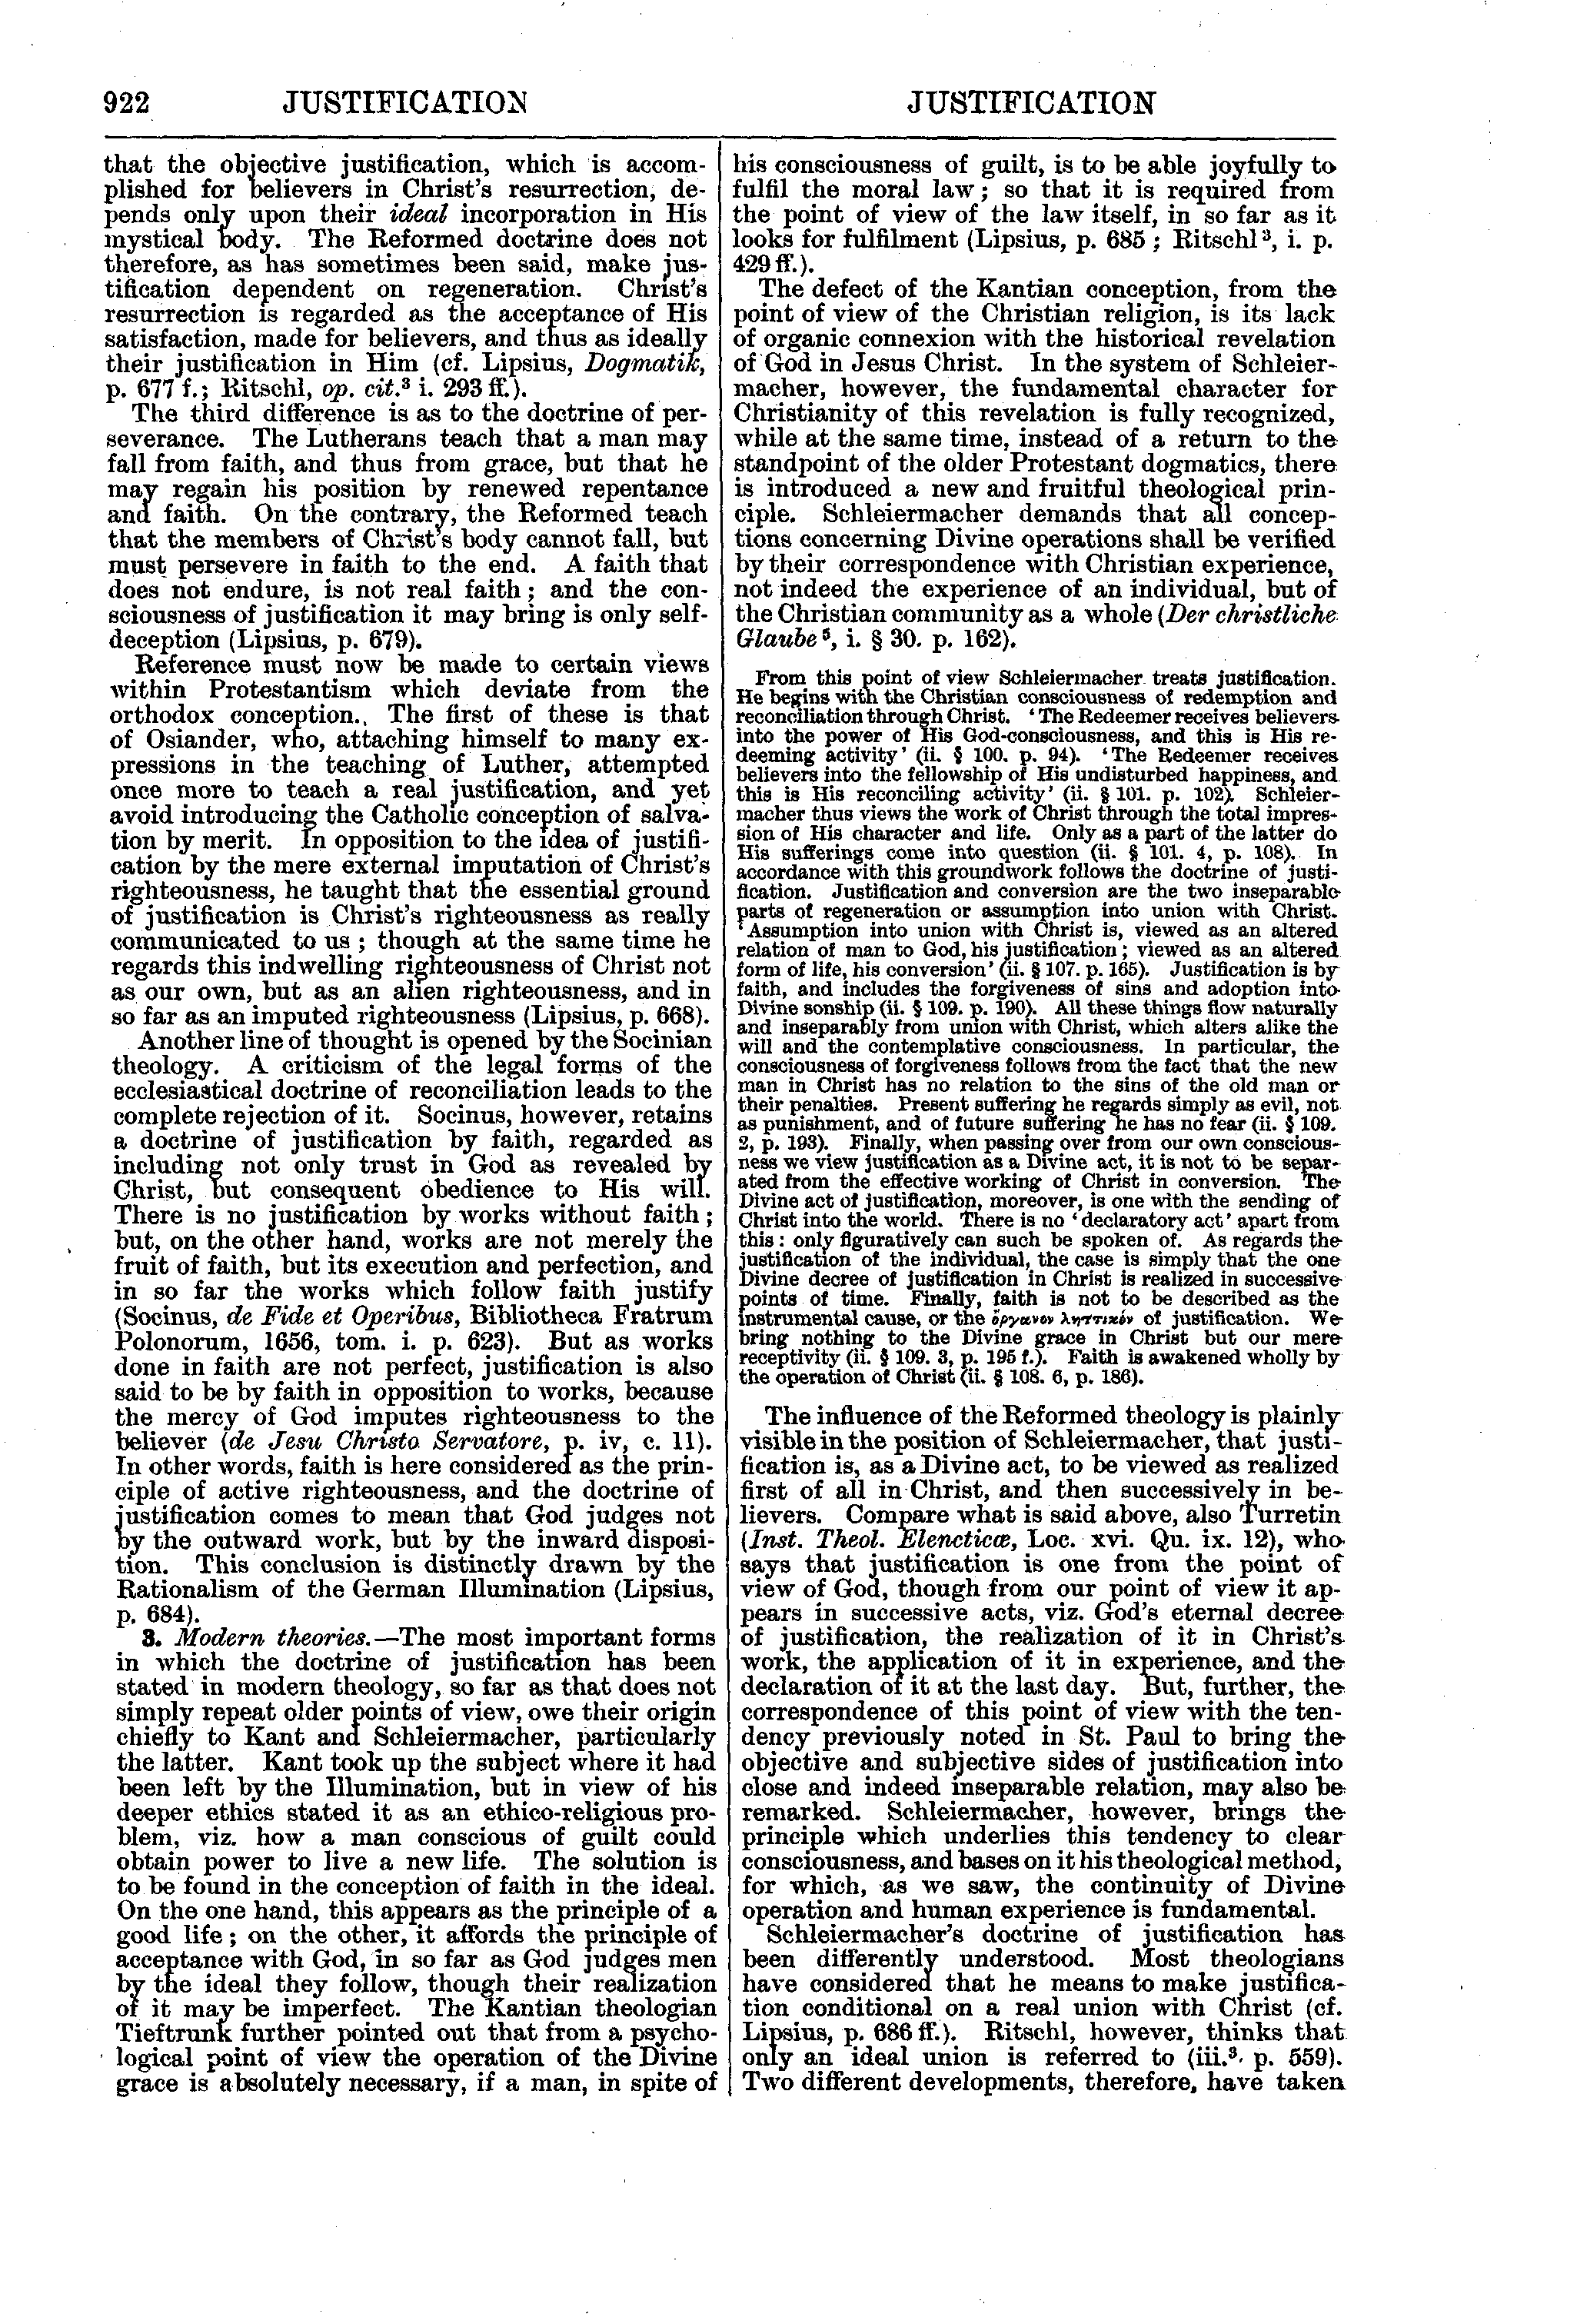 Image of page 922